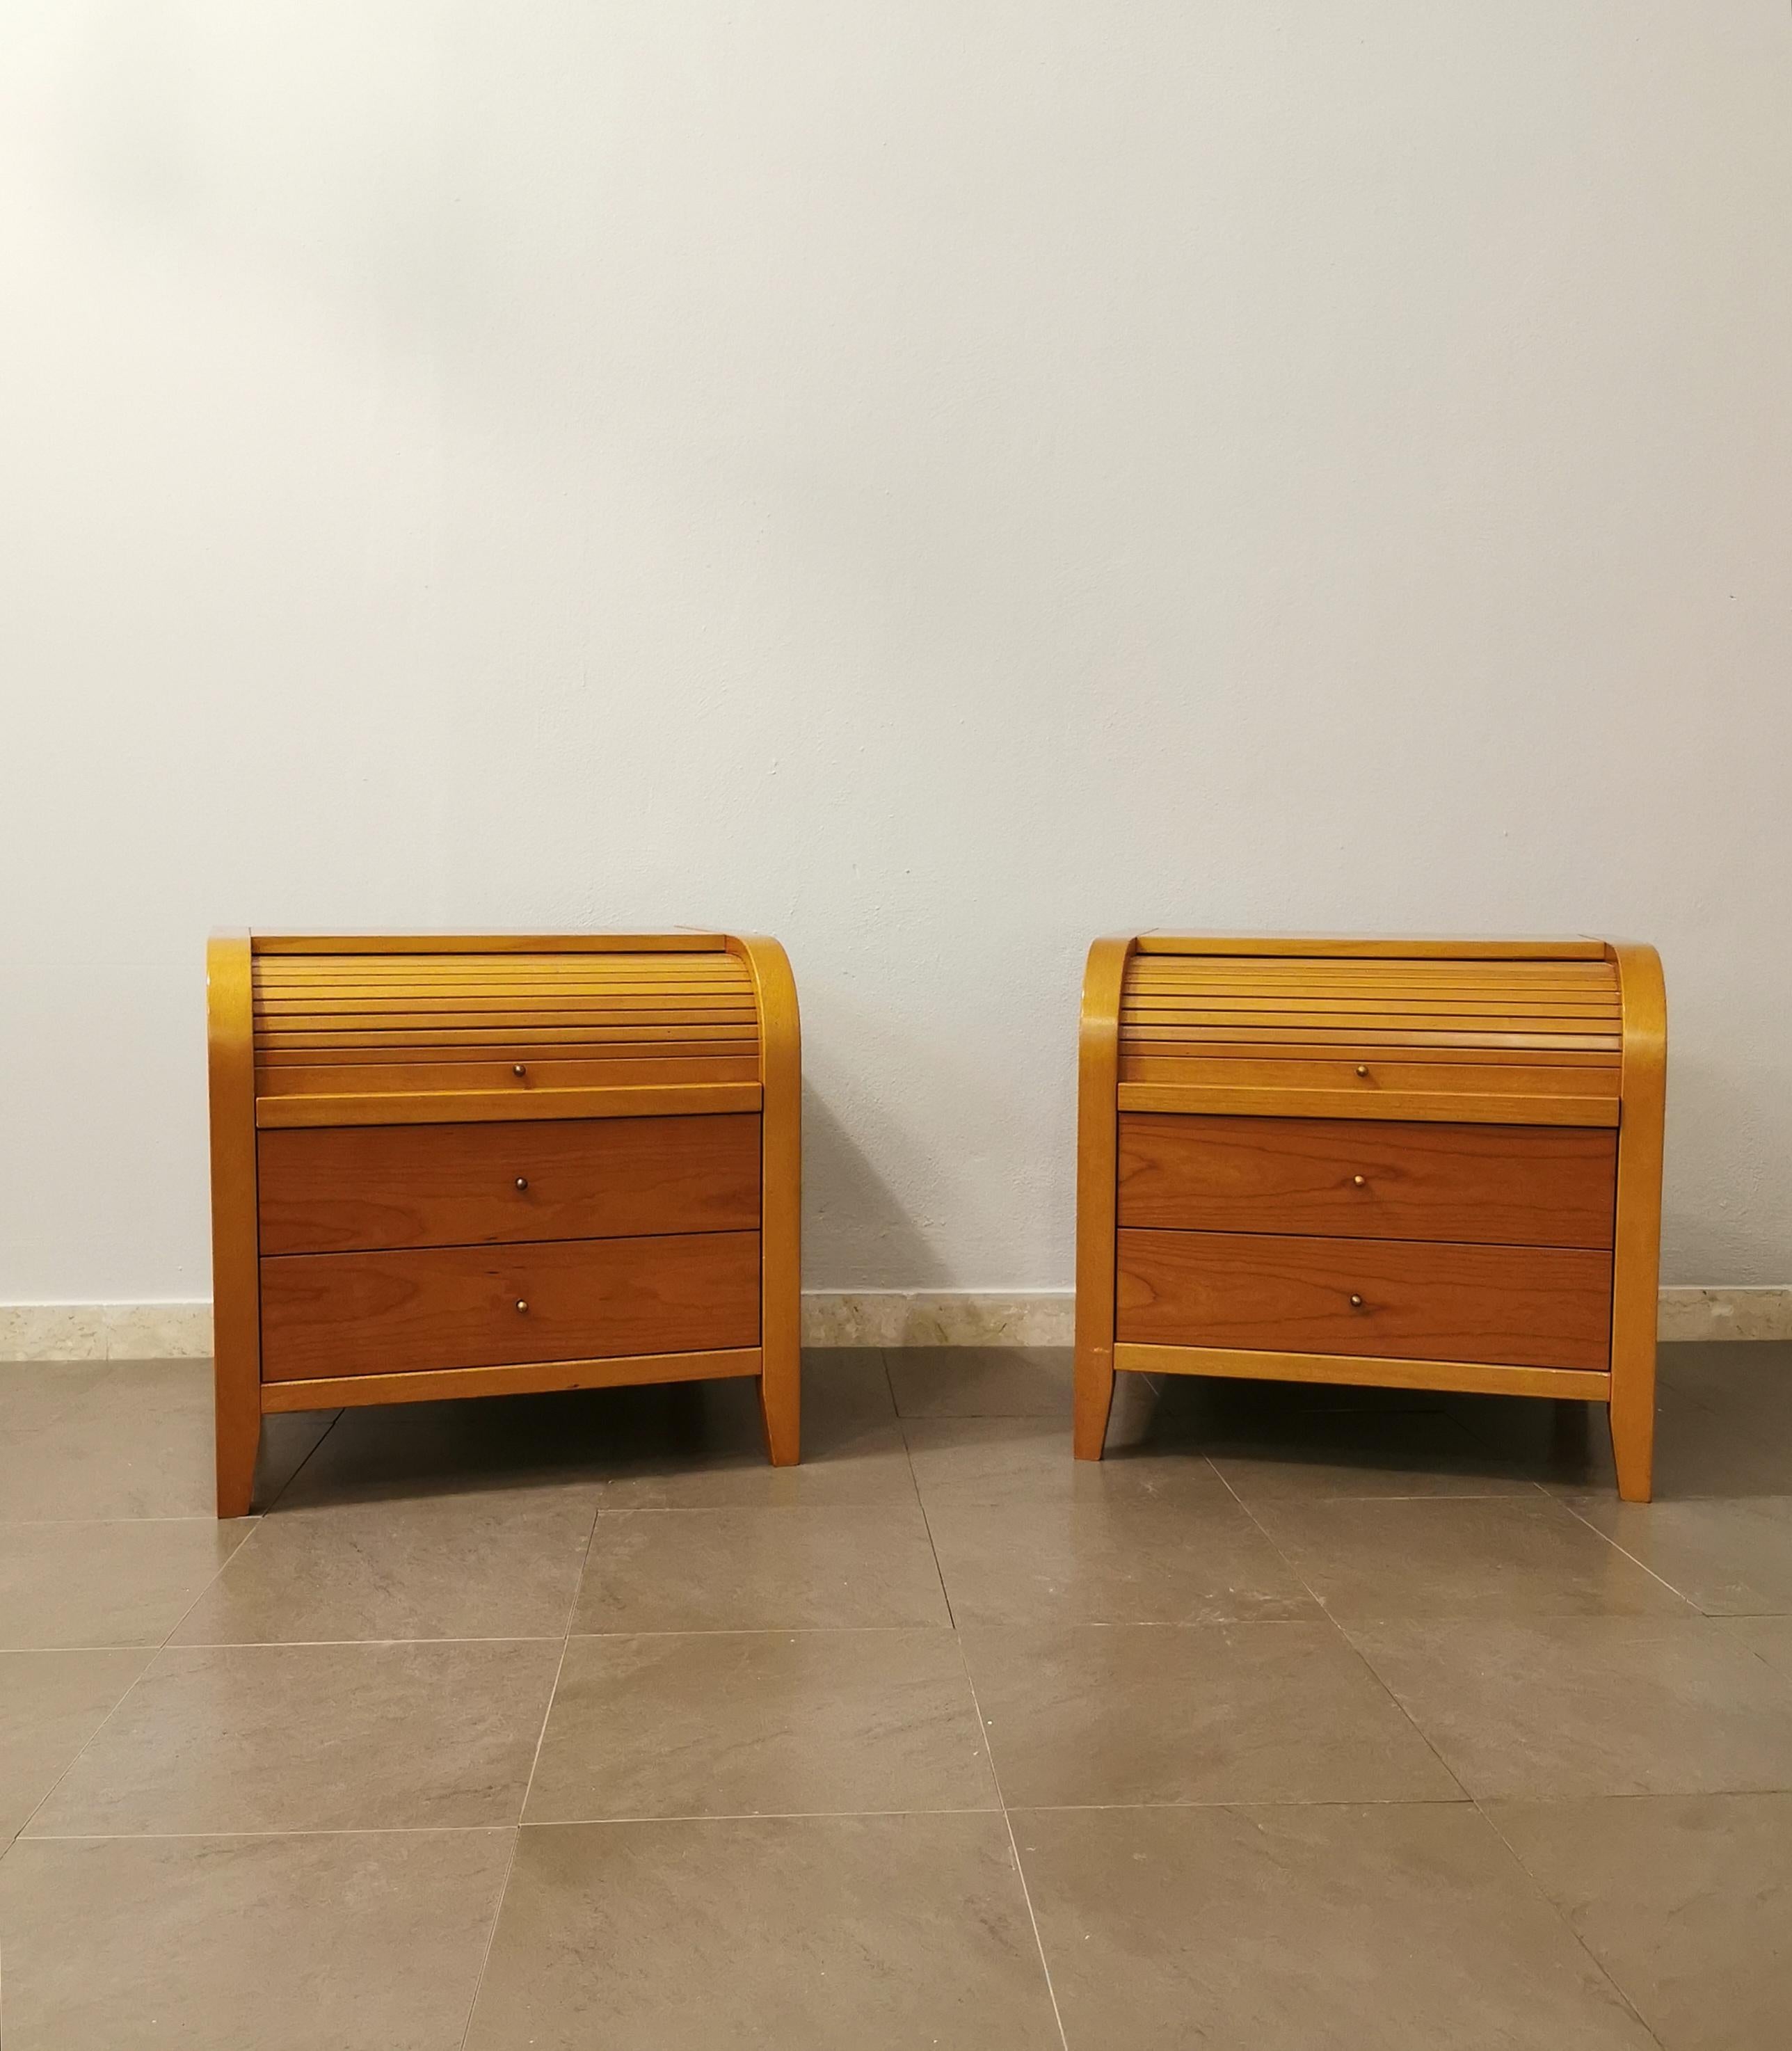 Late 20th Century Modern Bedside Tables Night Stands Cherry Wood Italian Design 1990s Set of 2